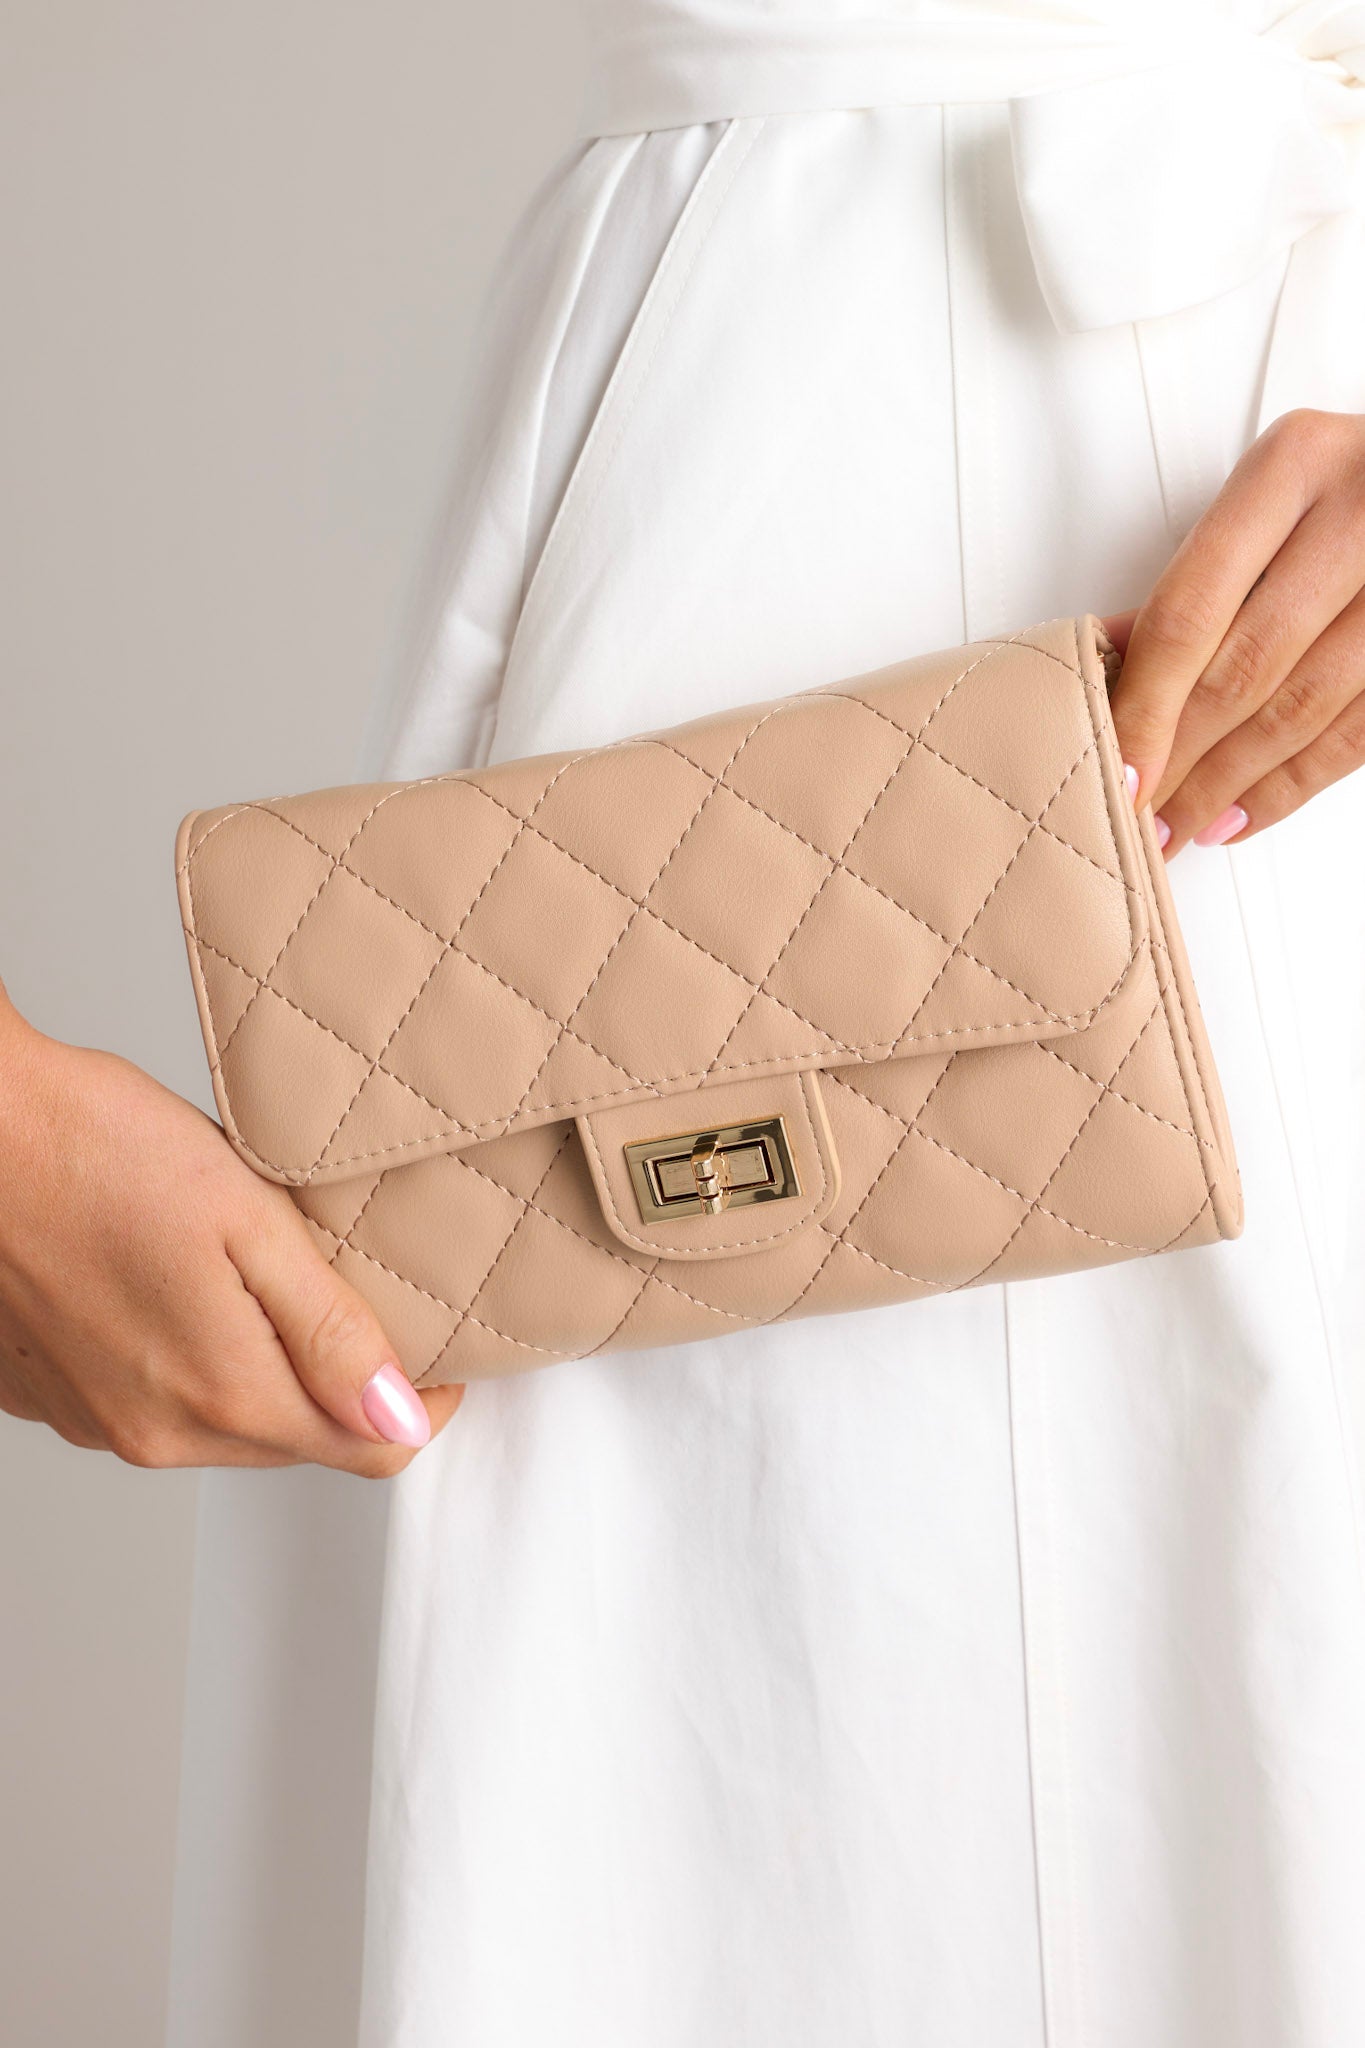 Close-up of a beige quilted clutch bag with a front turn-lock closure, held against a white dress